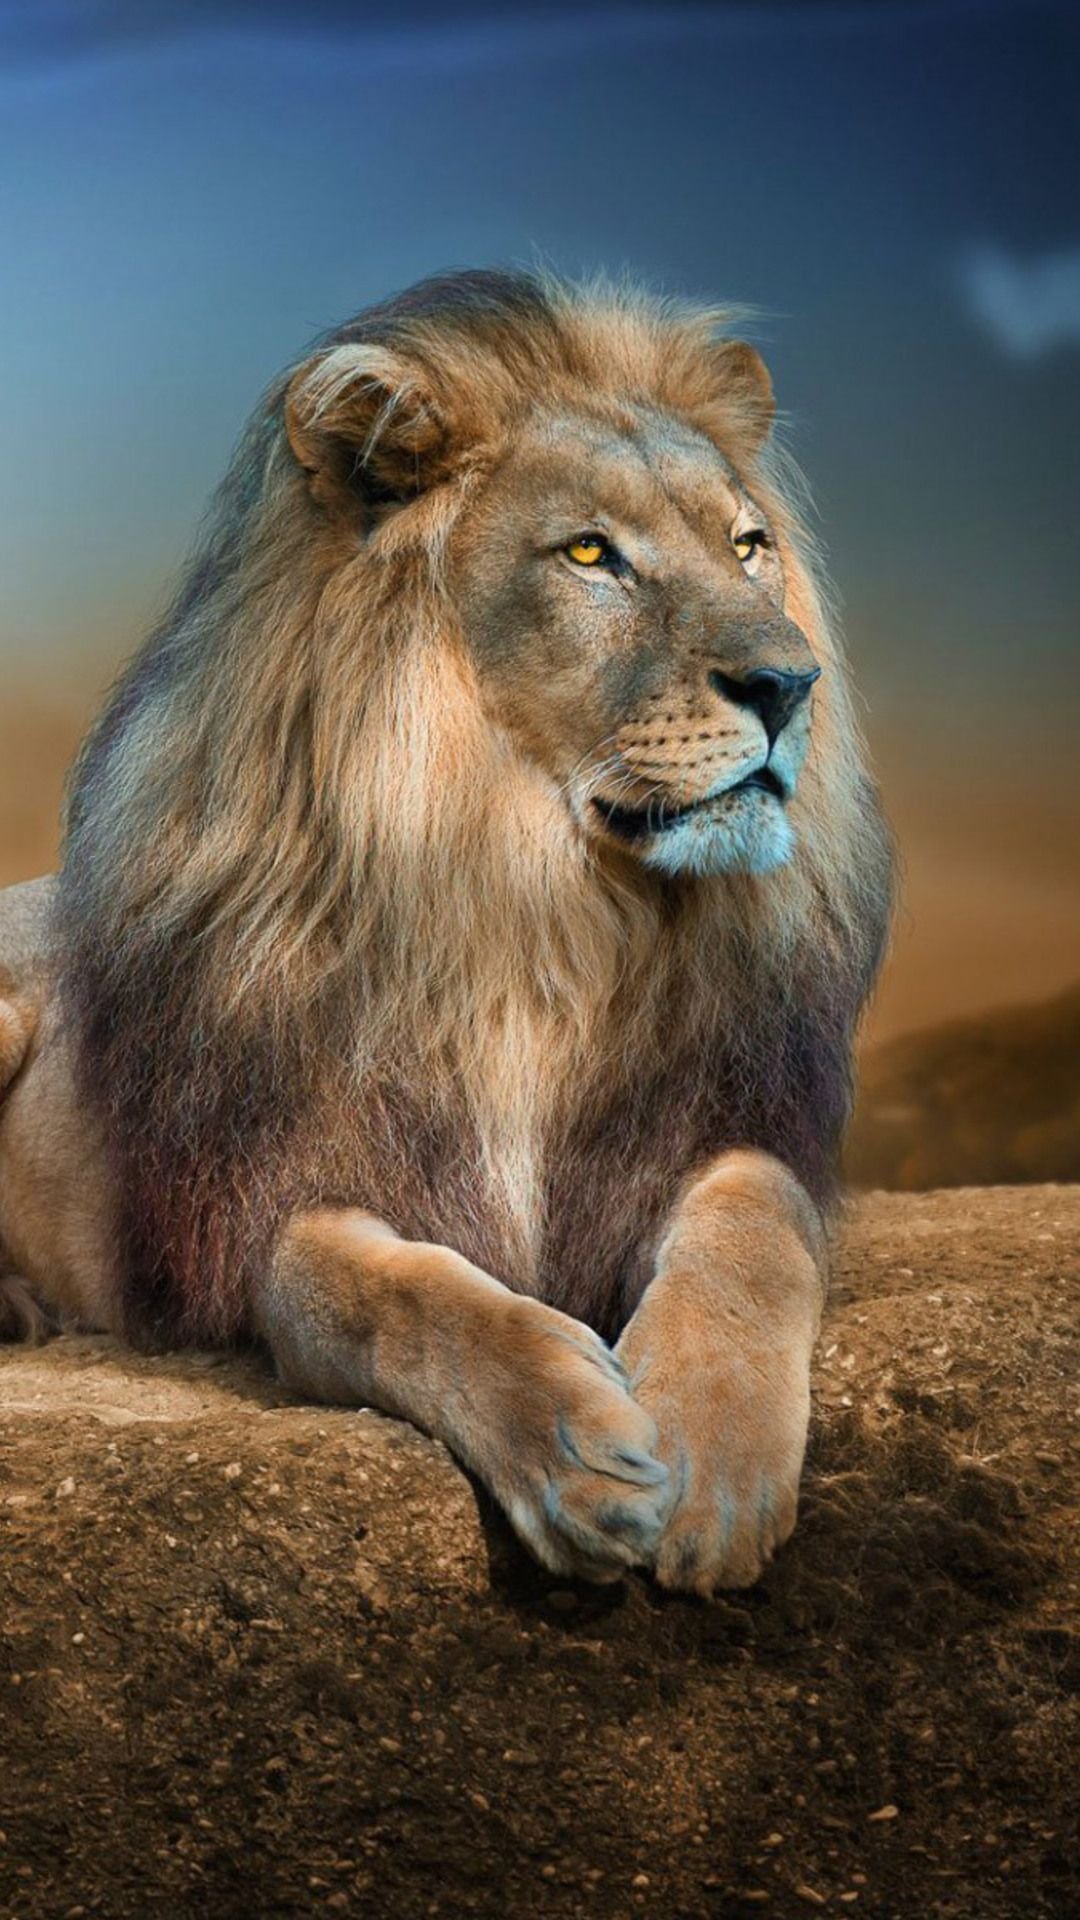 Lion Wallpapers and Backgrounds apps 4k:Amazon.co.uk:Appstore for Android